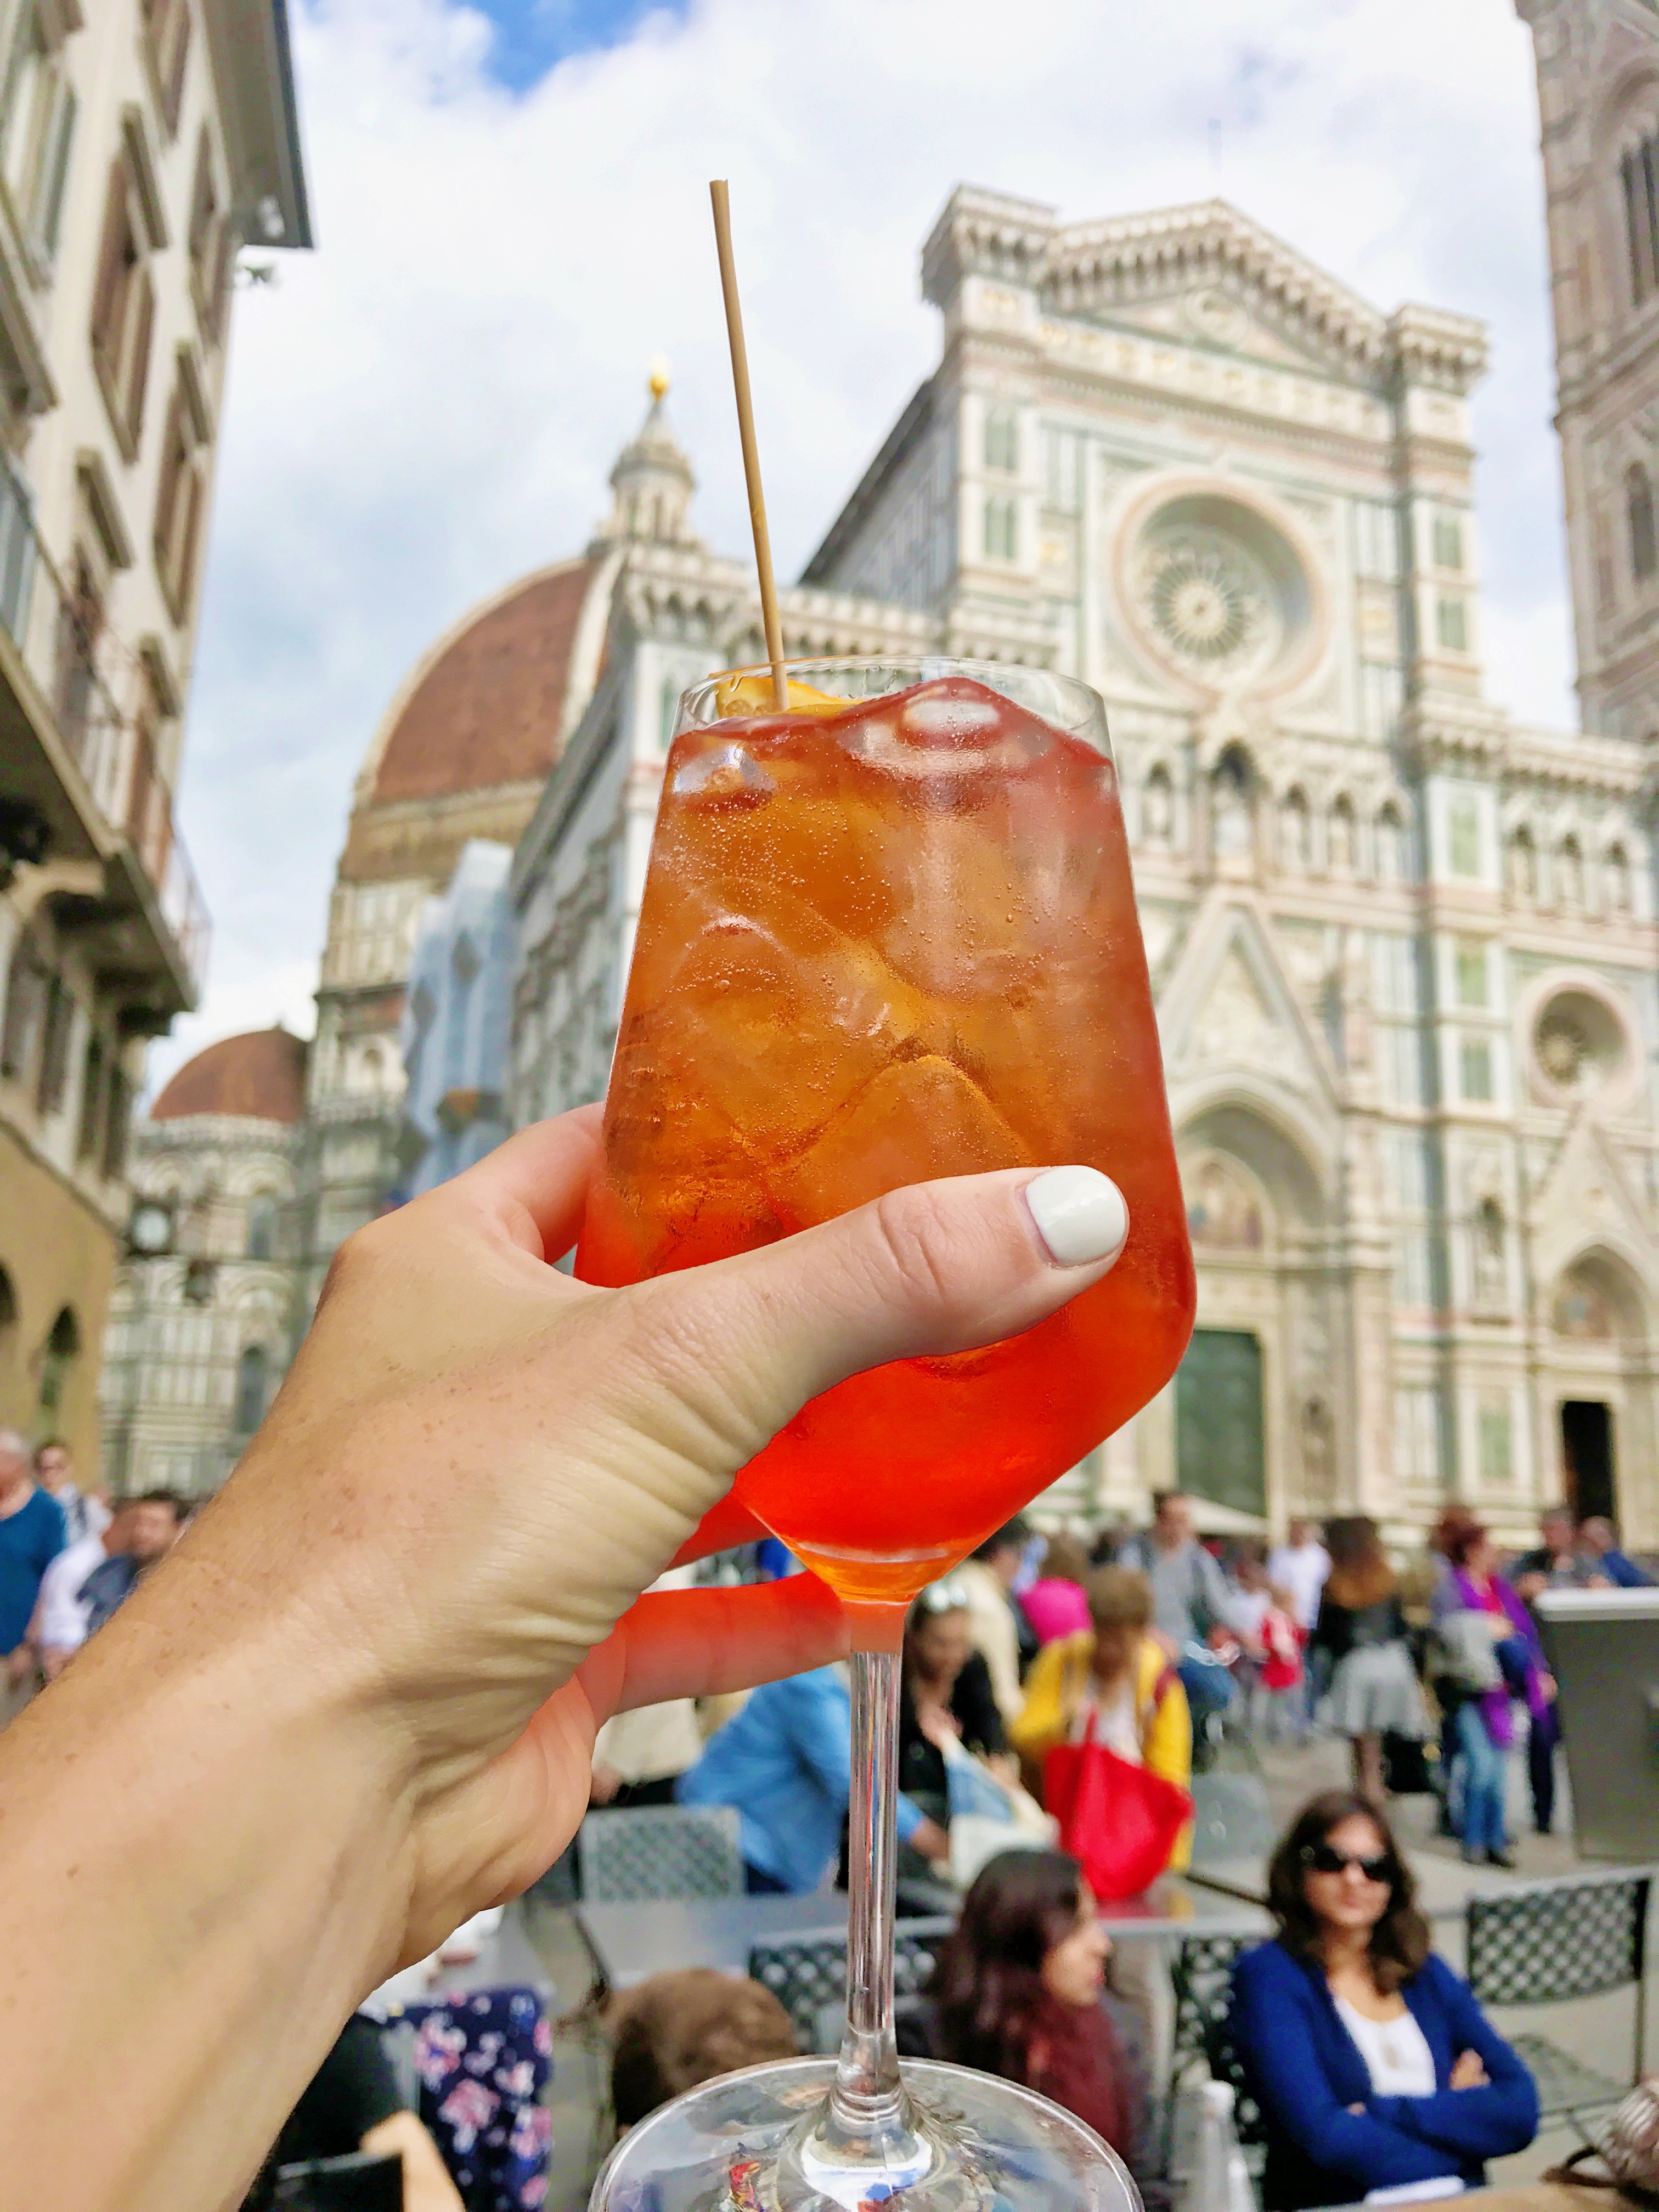 Italy On $100 A Day - Budget Travel Europe - Italy On A Budget - How To Travel On A Budget - Budget Travel Tips - Italy Travel Tips - Florence - Venice - Rome - Milan - Travel Blog - Communikait by Kait Hanson - Europe on a budget